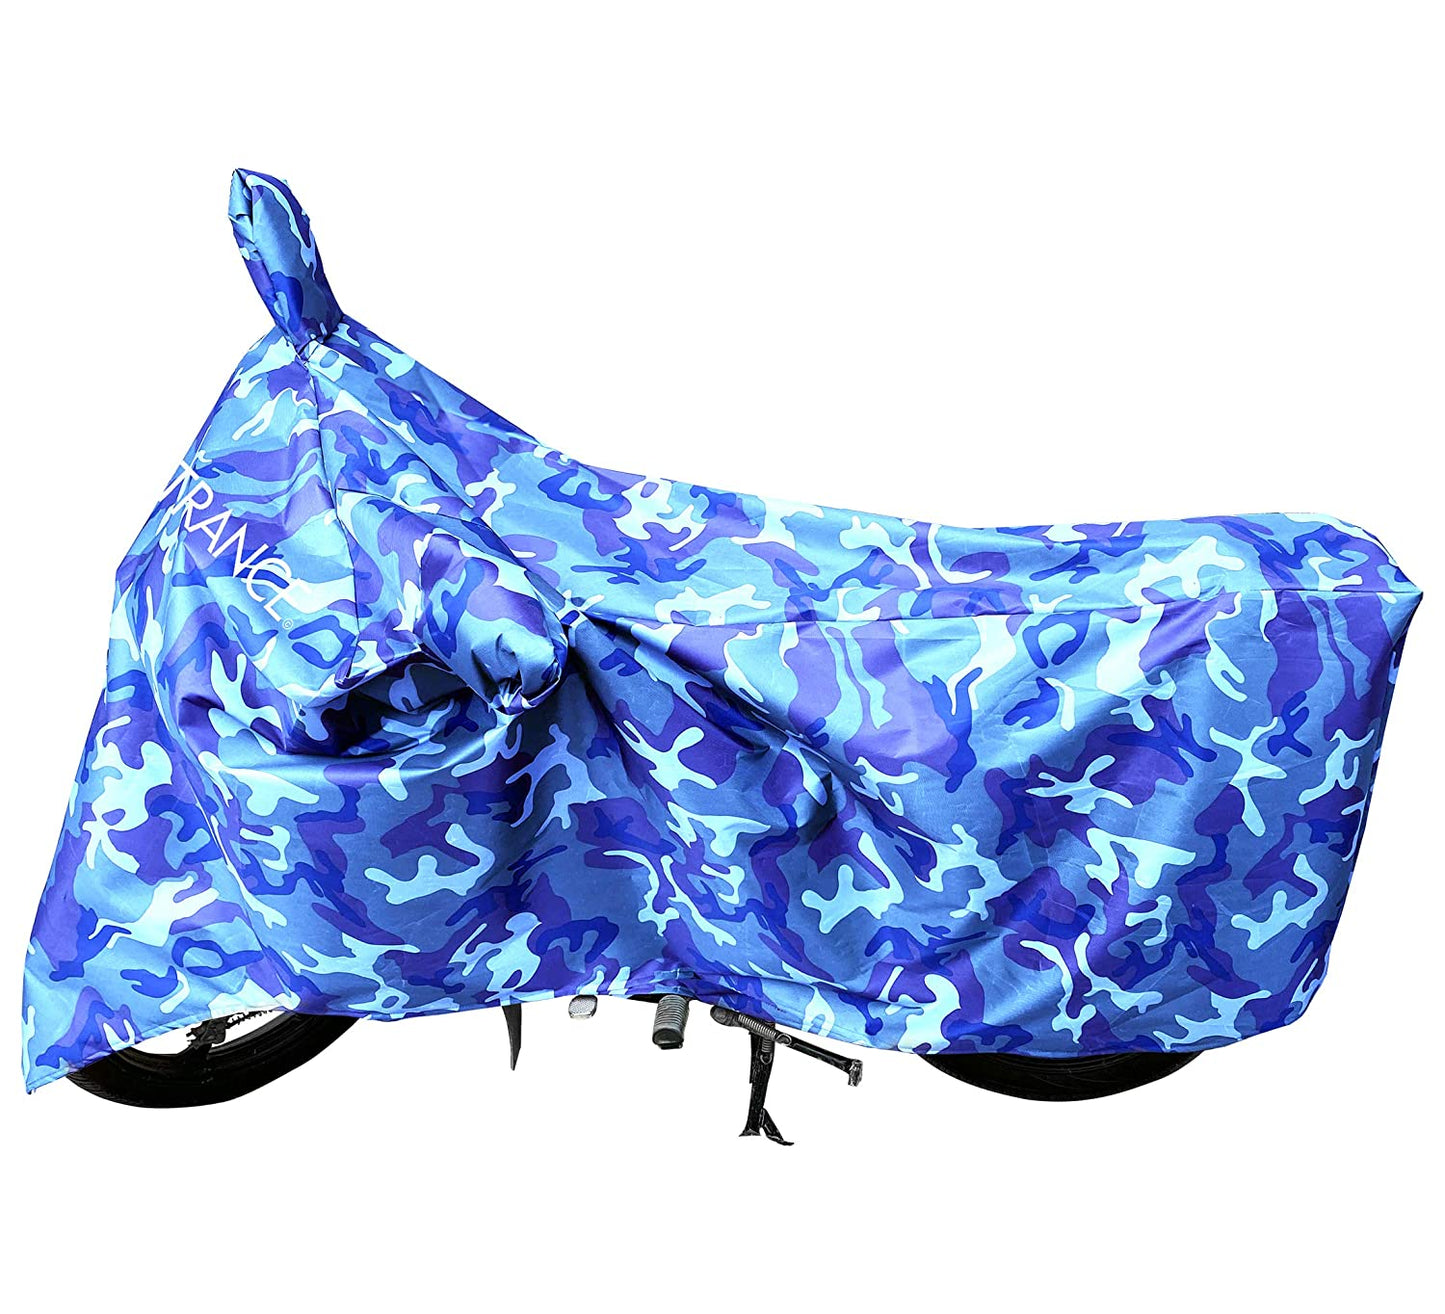 MotoTrance Jungle Bike Body Covers For Yo Xplor - Interlock-Stitched Waterproof and Heat Resistant with Mirror Pockets